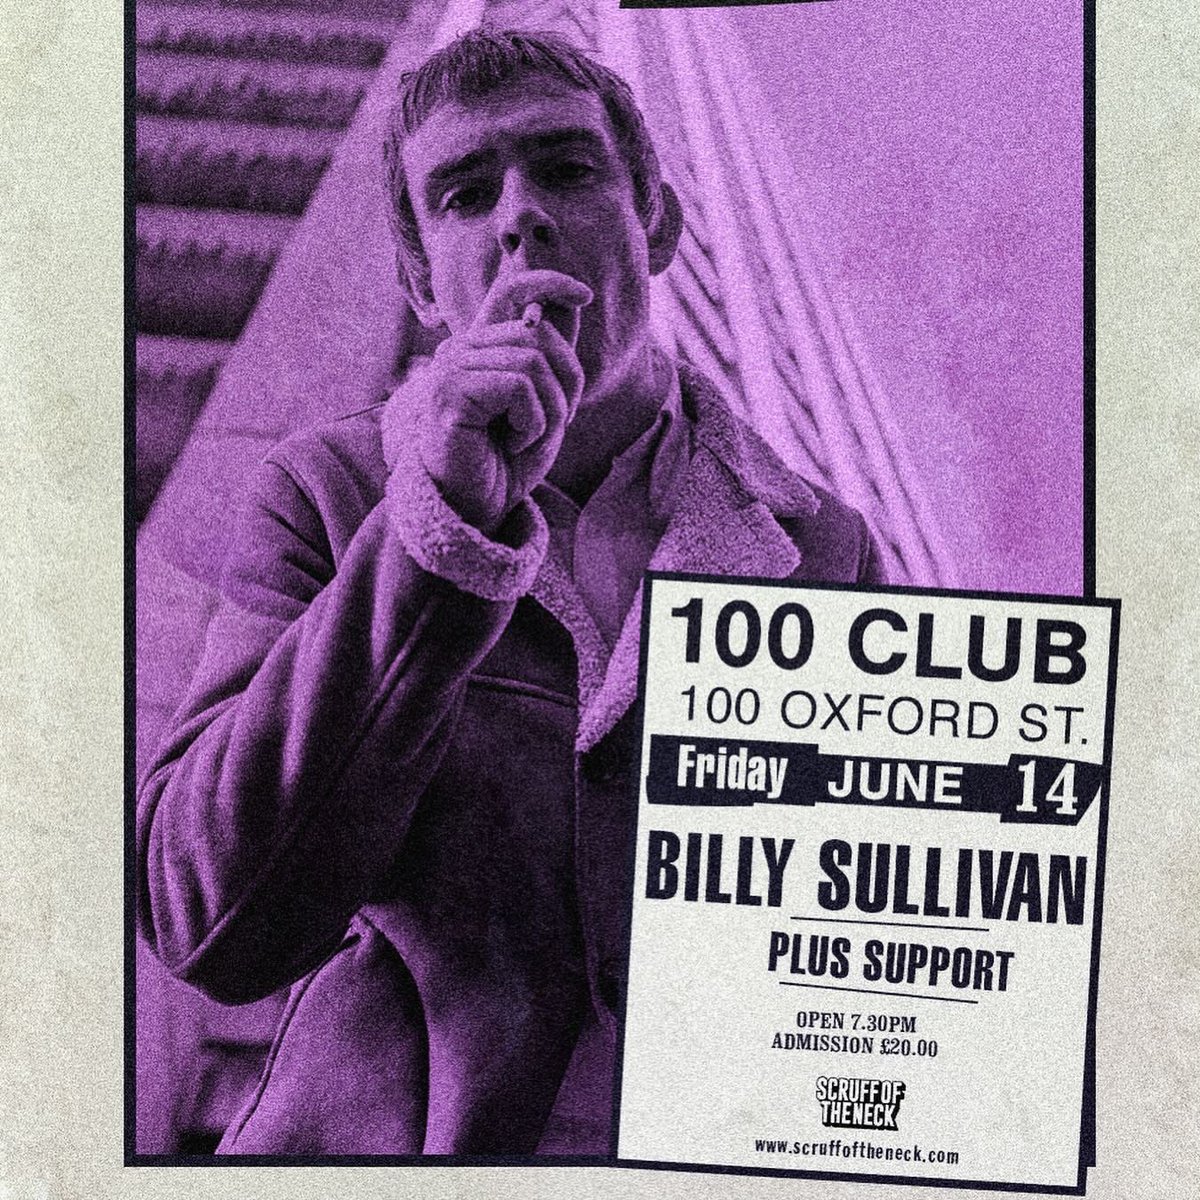 7 weeks to go until me and my band return to @100clubLondon 🚨 Get your tickets now: linktr.ee/BillySullivan In the meantime, who would like some new music? 👀